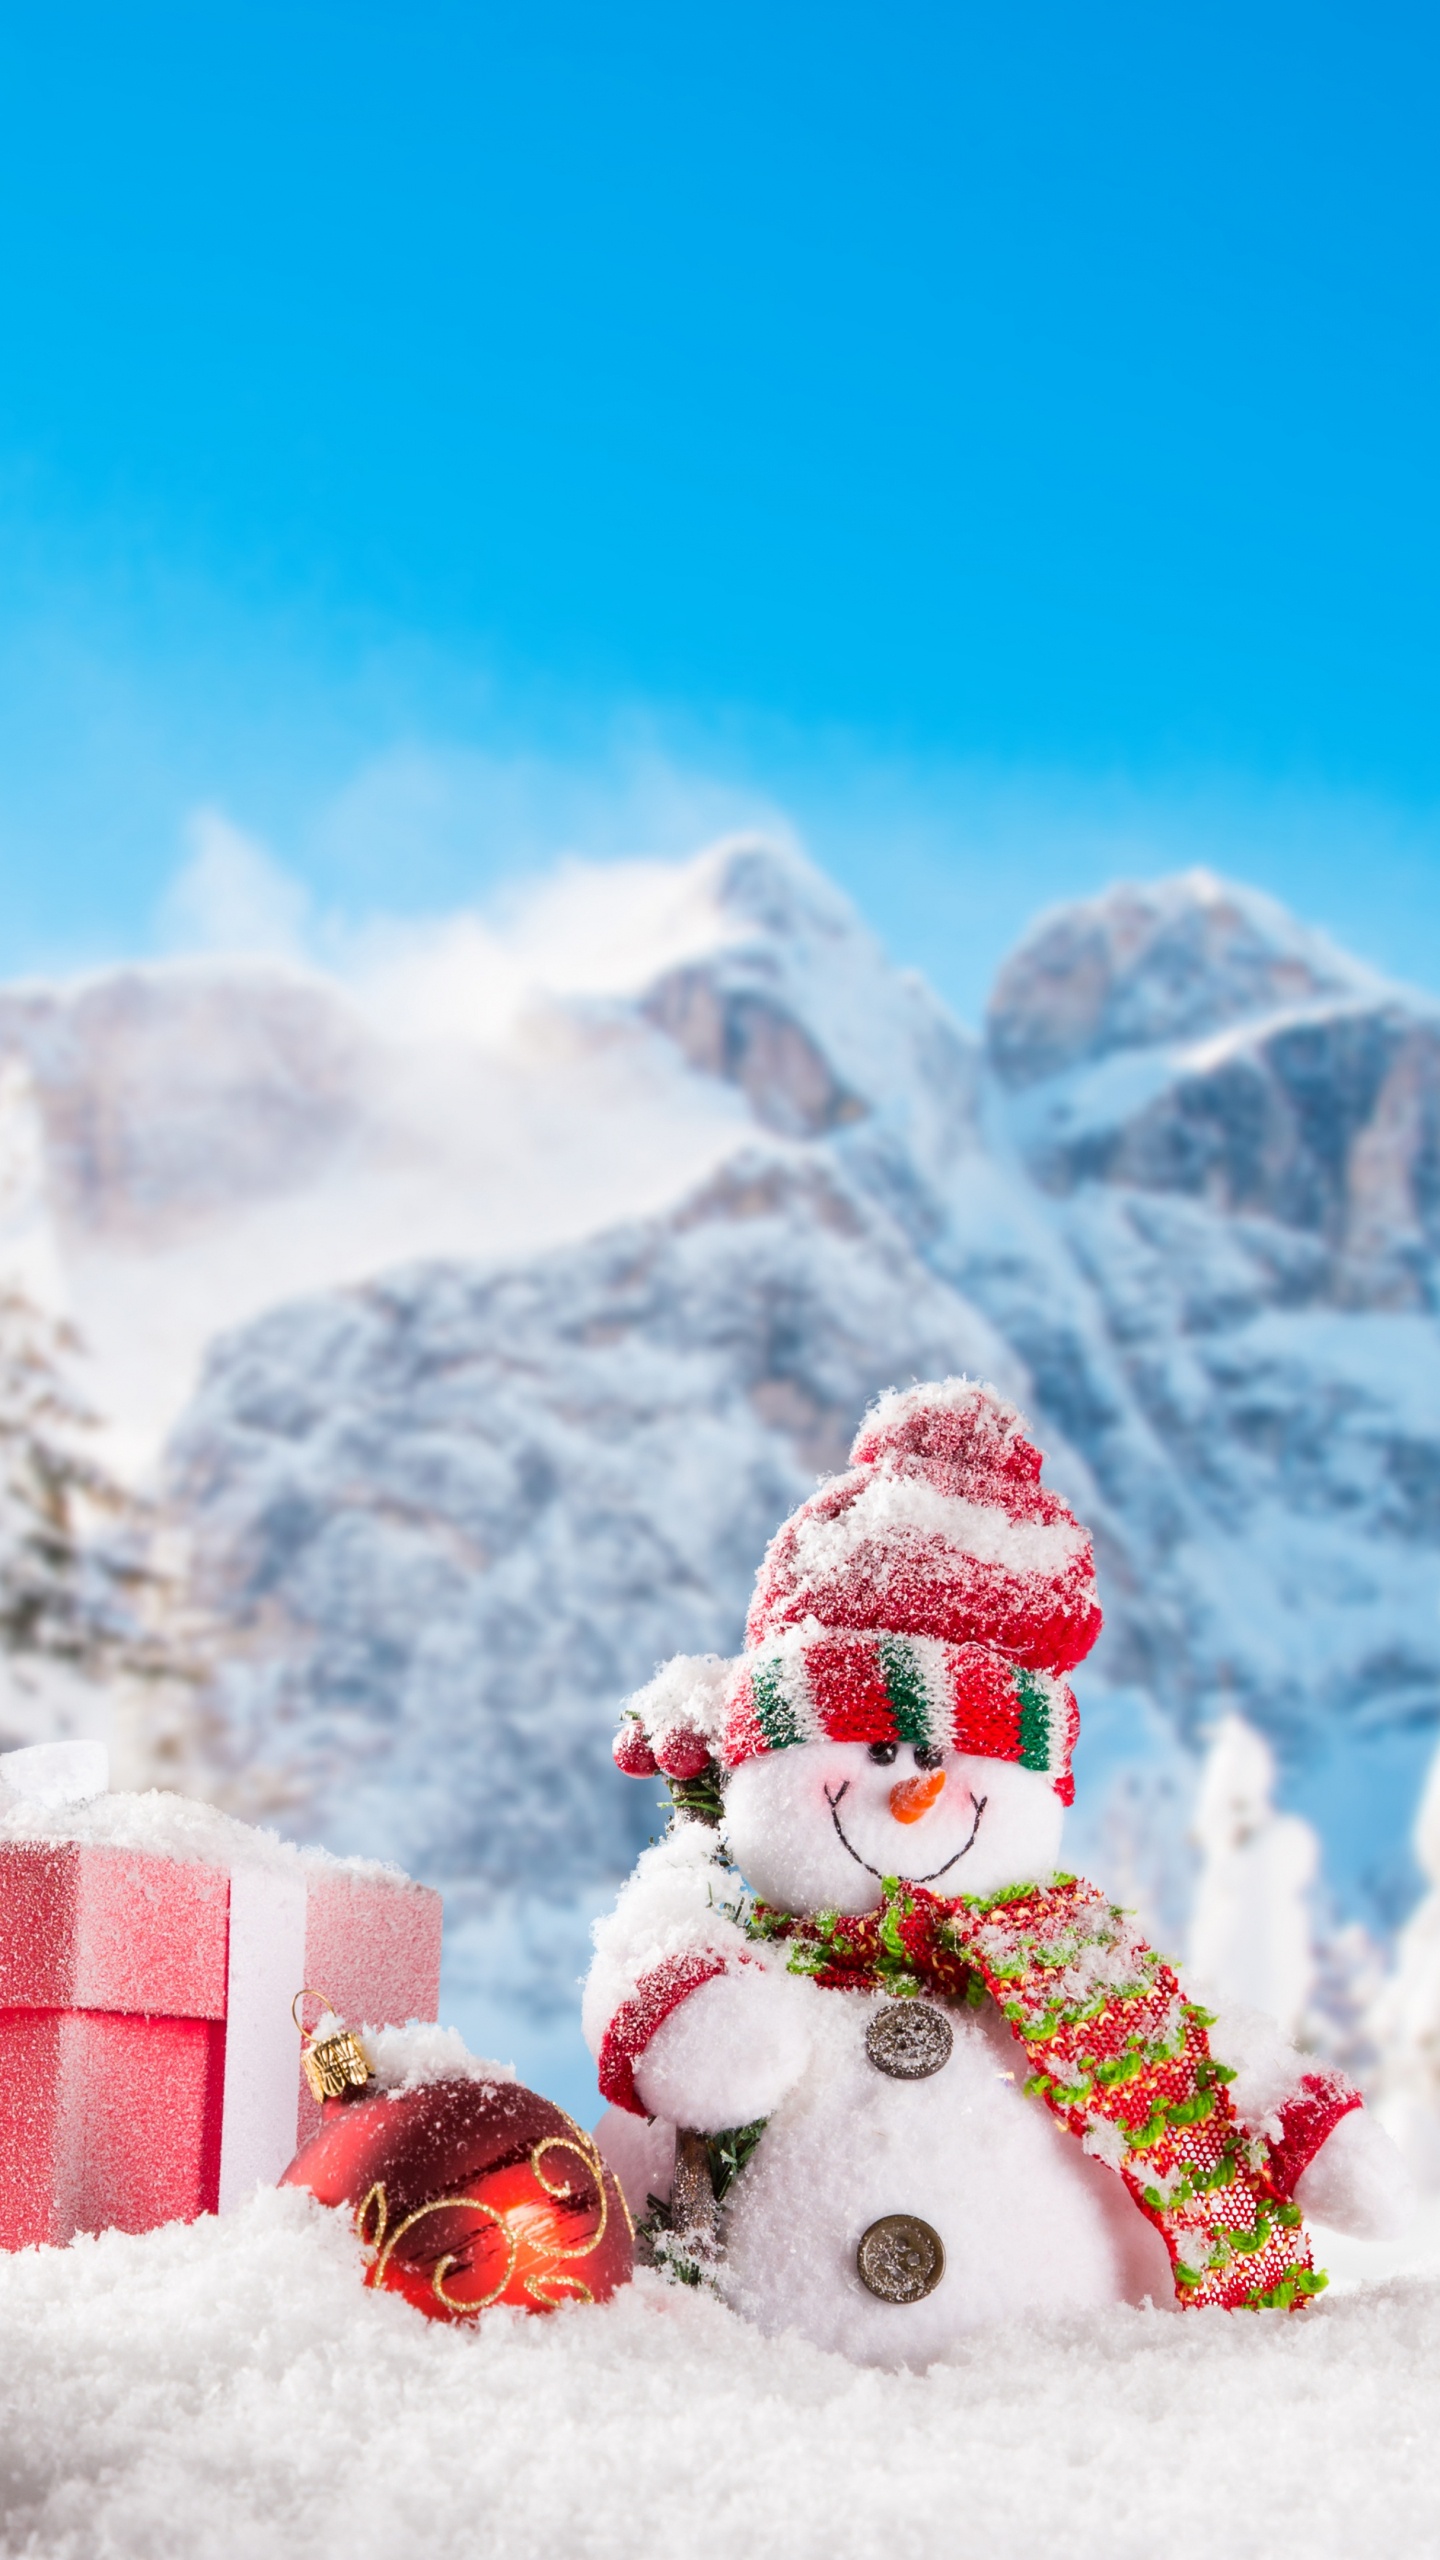 Red and White Santa Claus on Snow Covered Ground During Daytime. Wallpaper in 1440x2560 Resolution